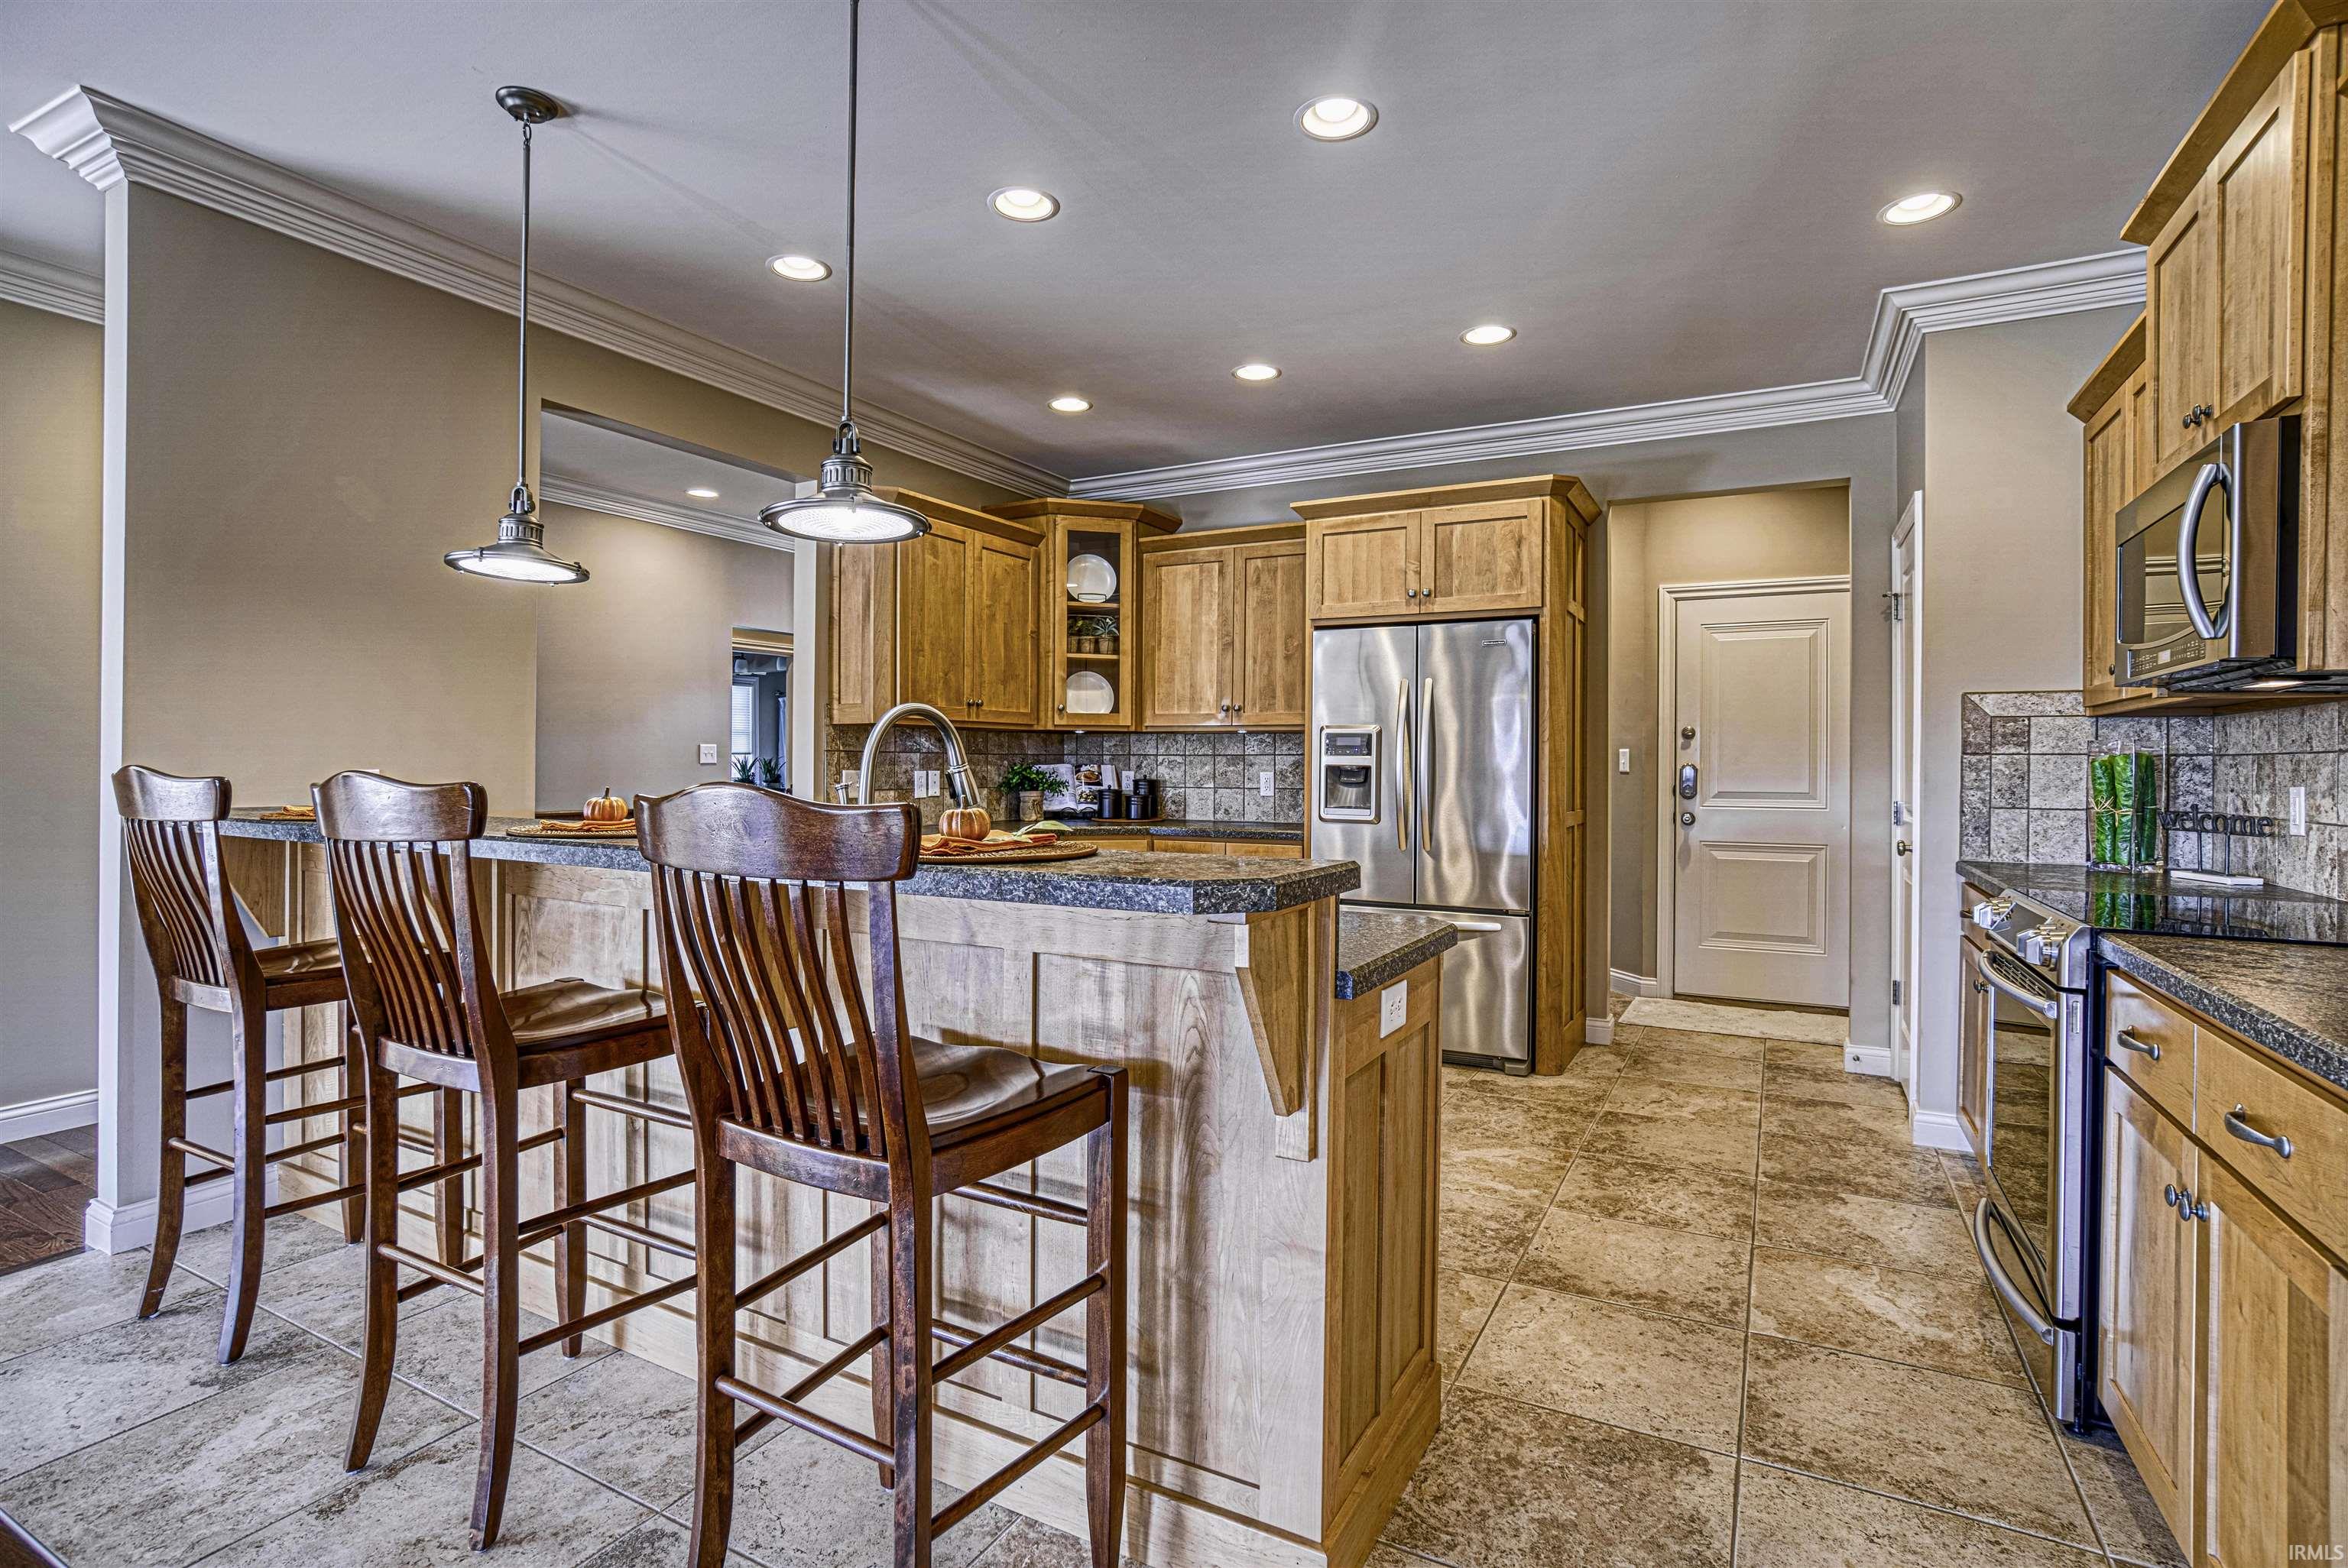 The kitchen with raised breakfast bar and pendant lighting will delight any cook with...